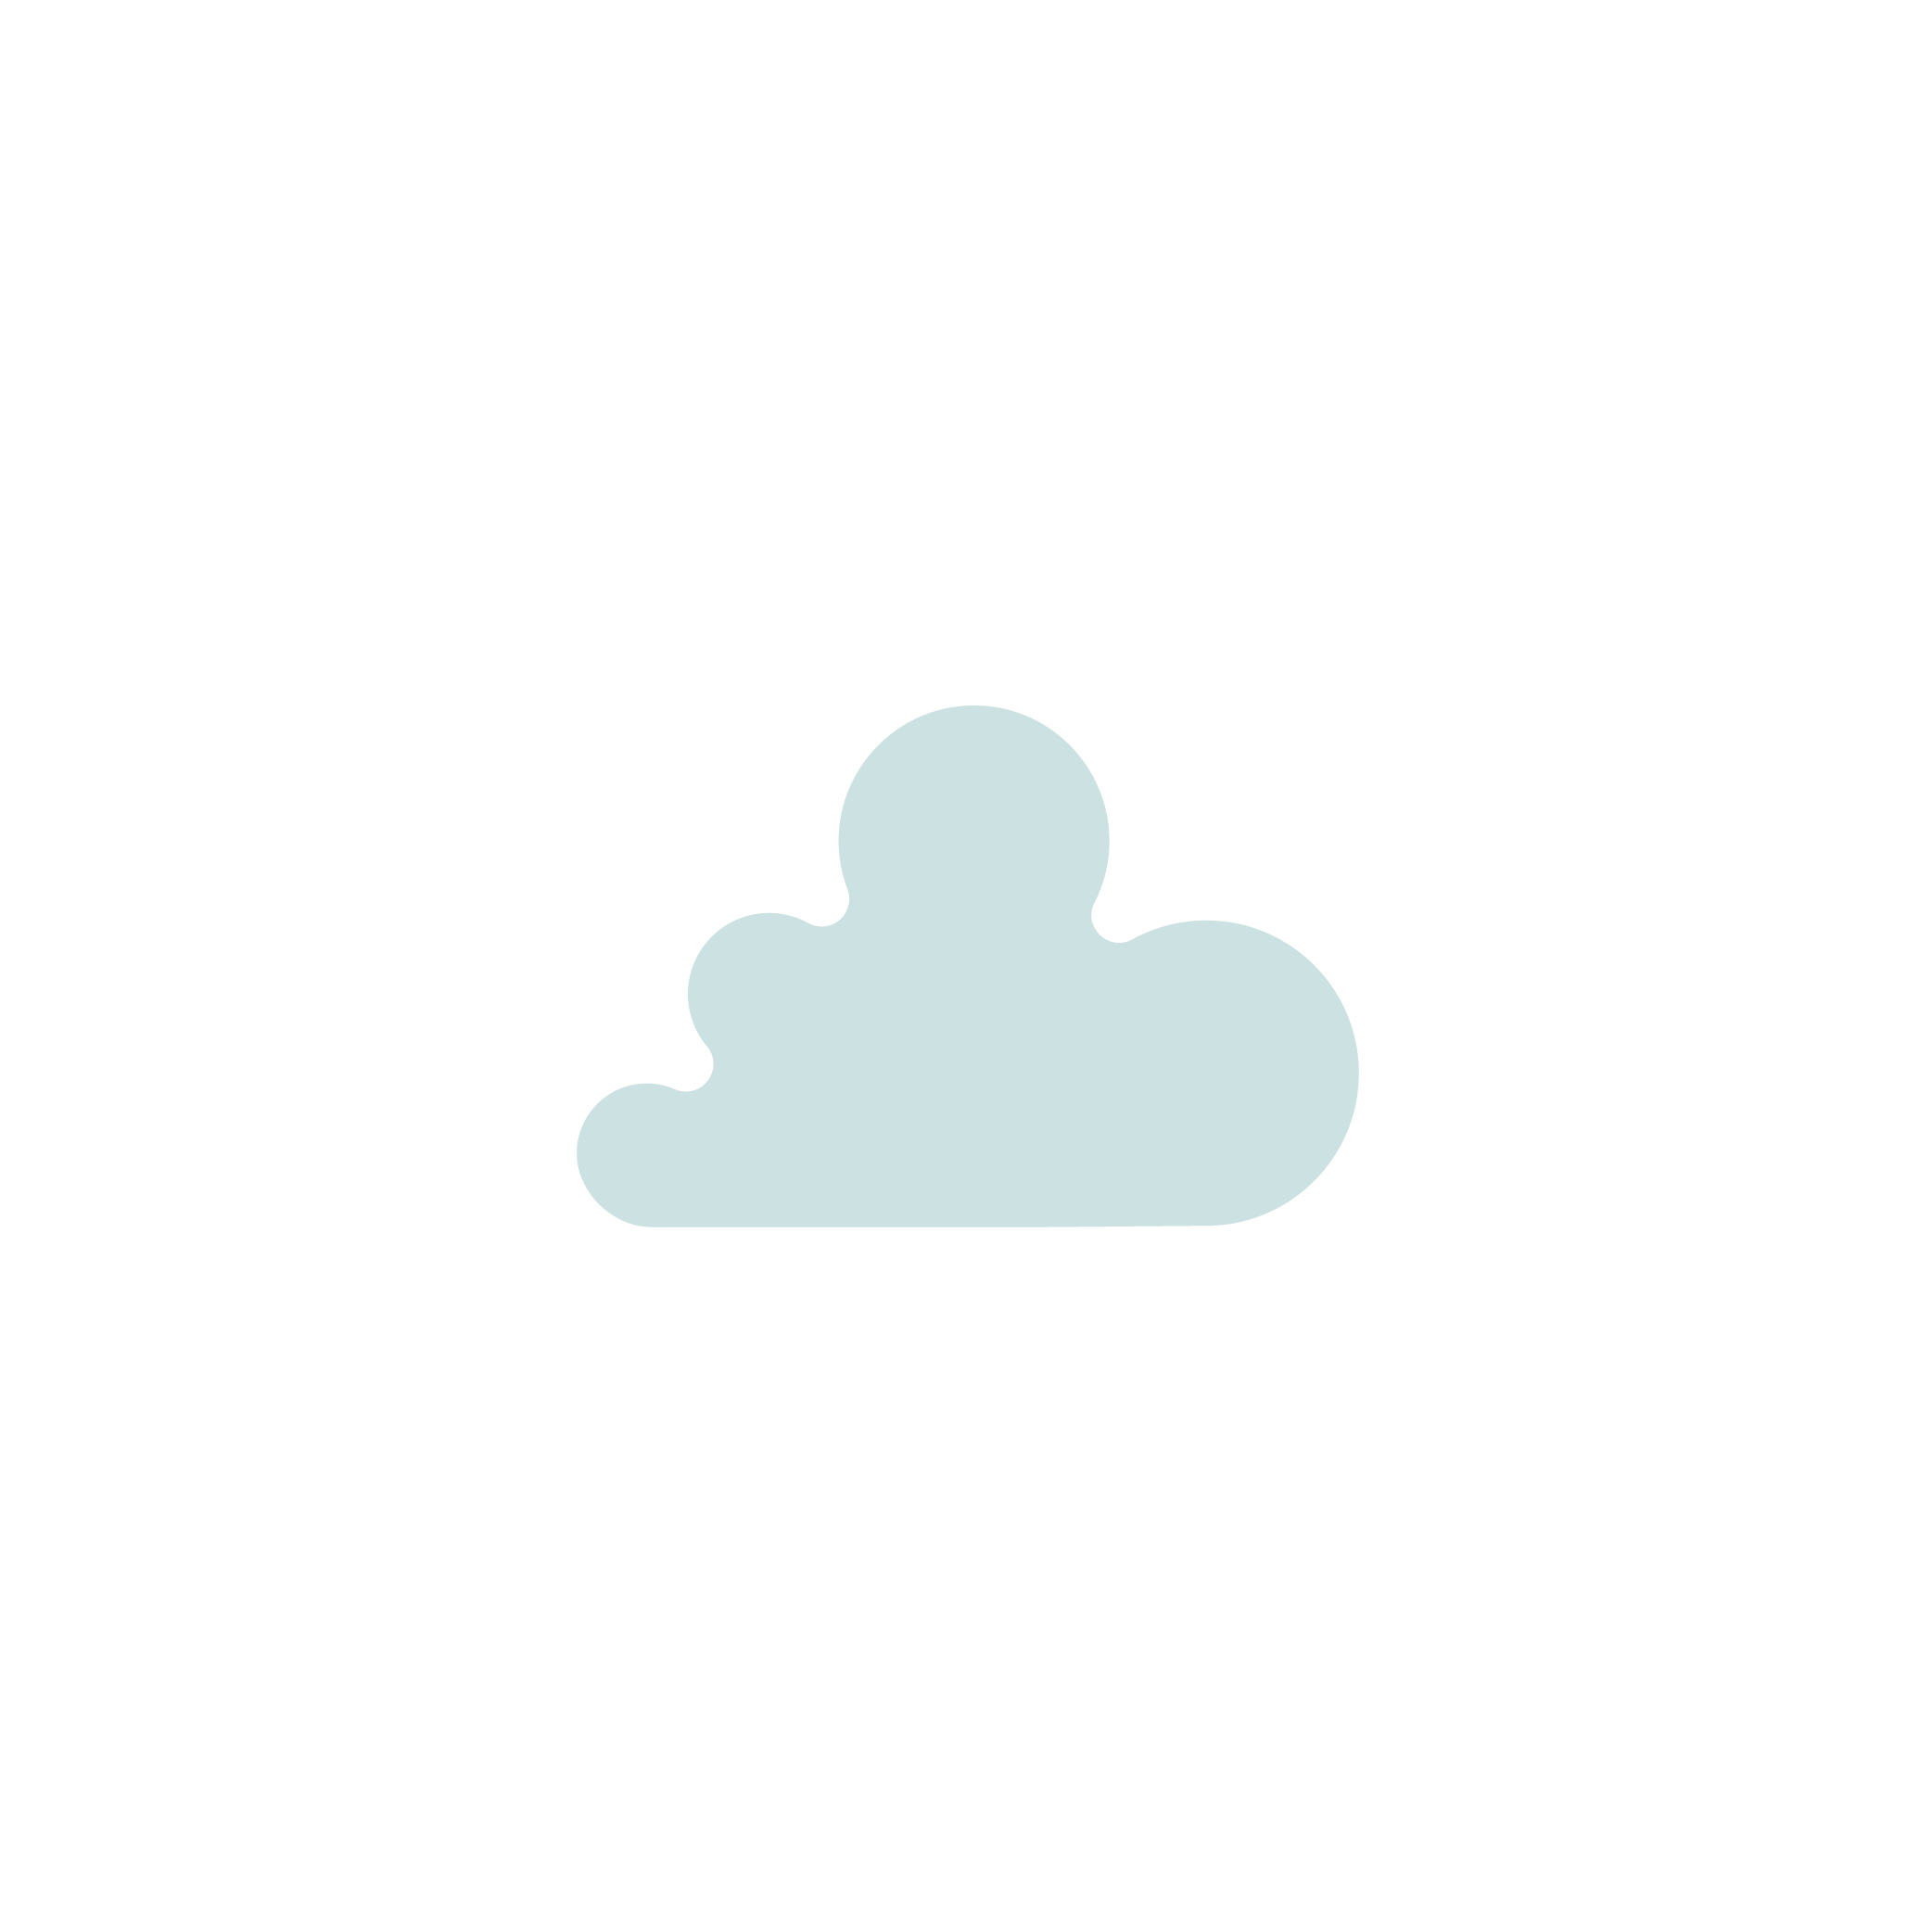 an icon of a cloud in white outline centered in a squircle with white outline